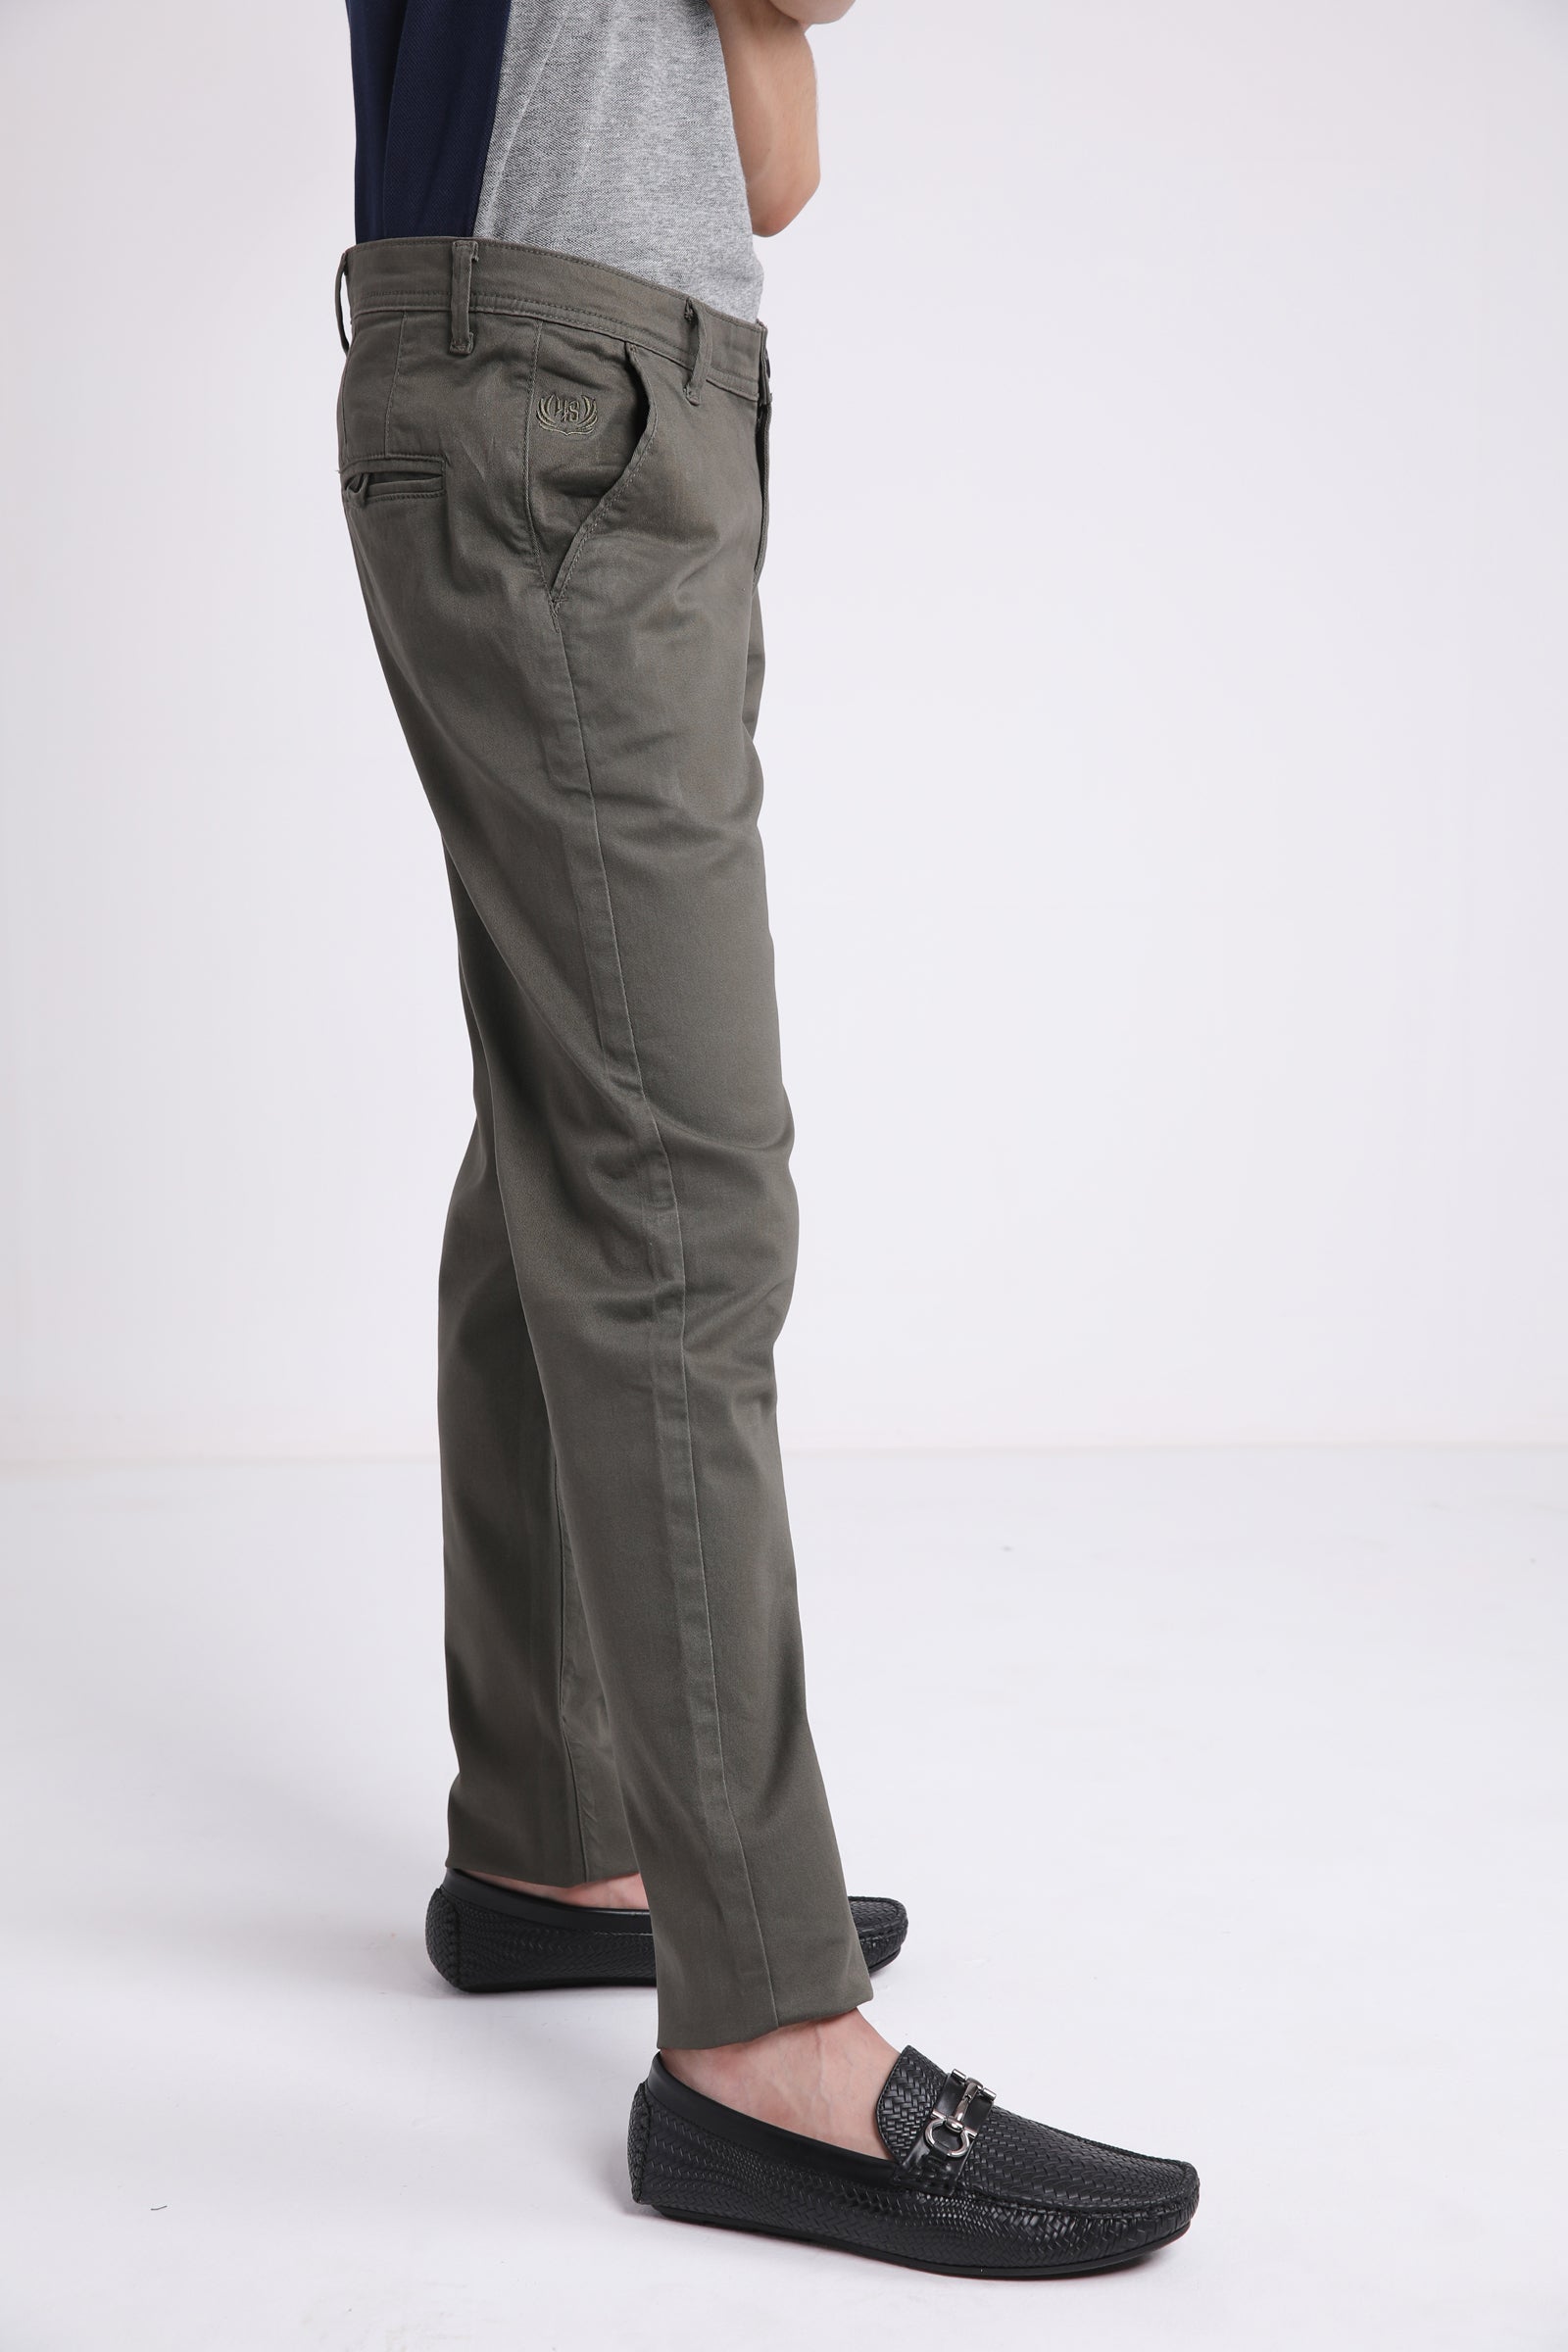 Olive Green Slim Fit Chino